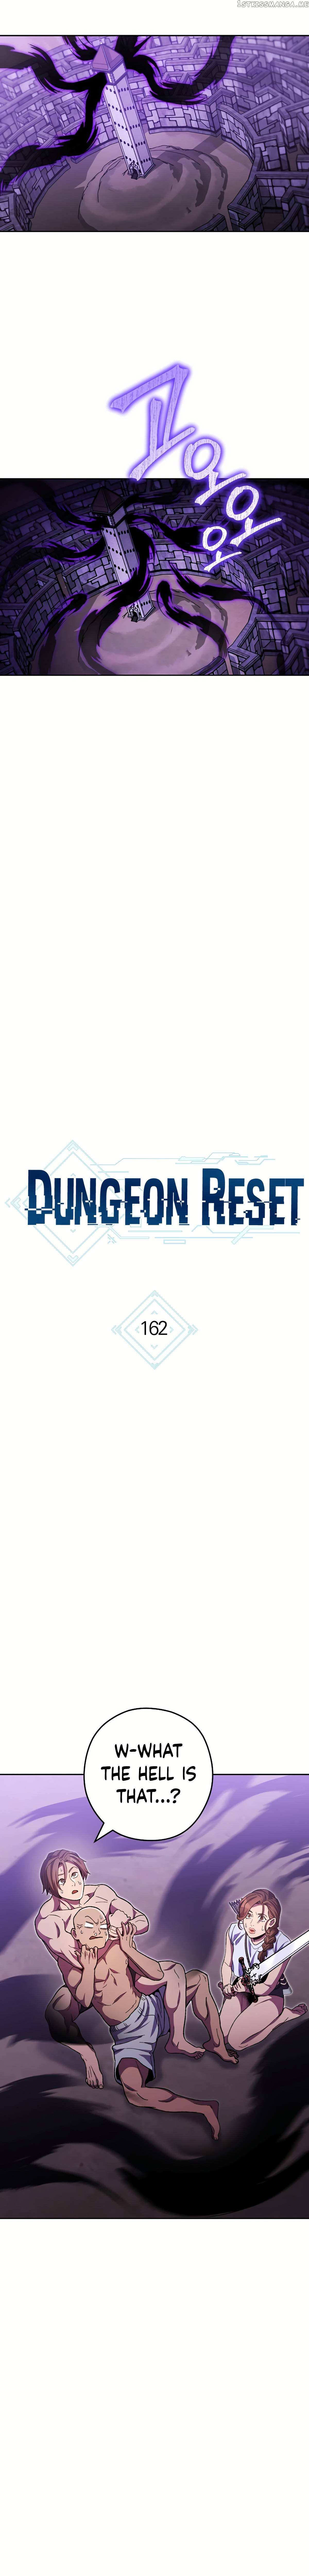 Dungeon Reset - Page 2